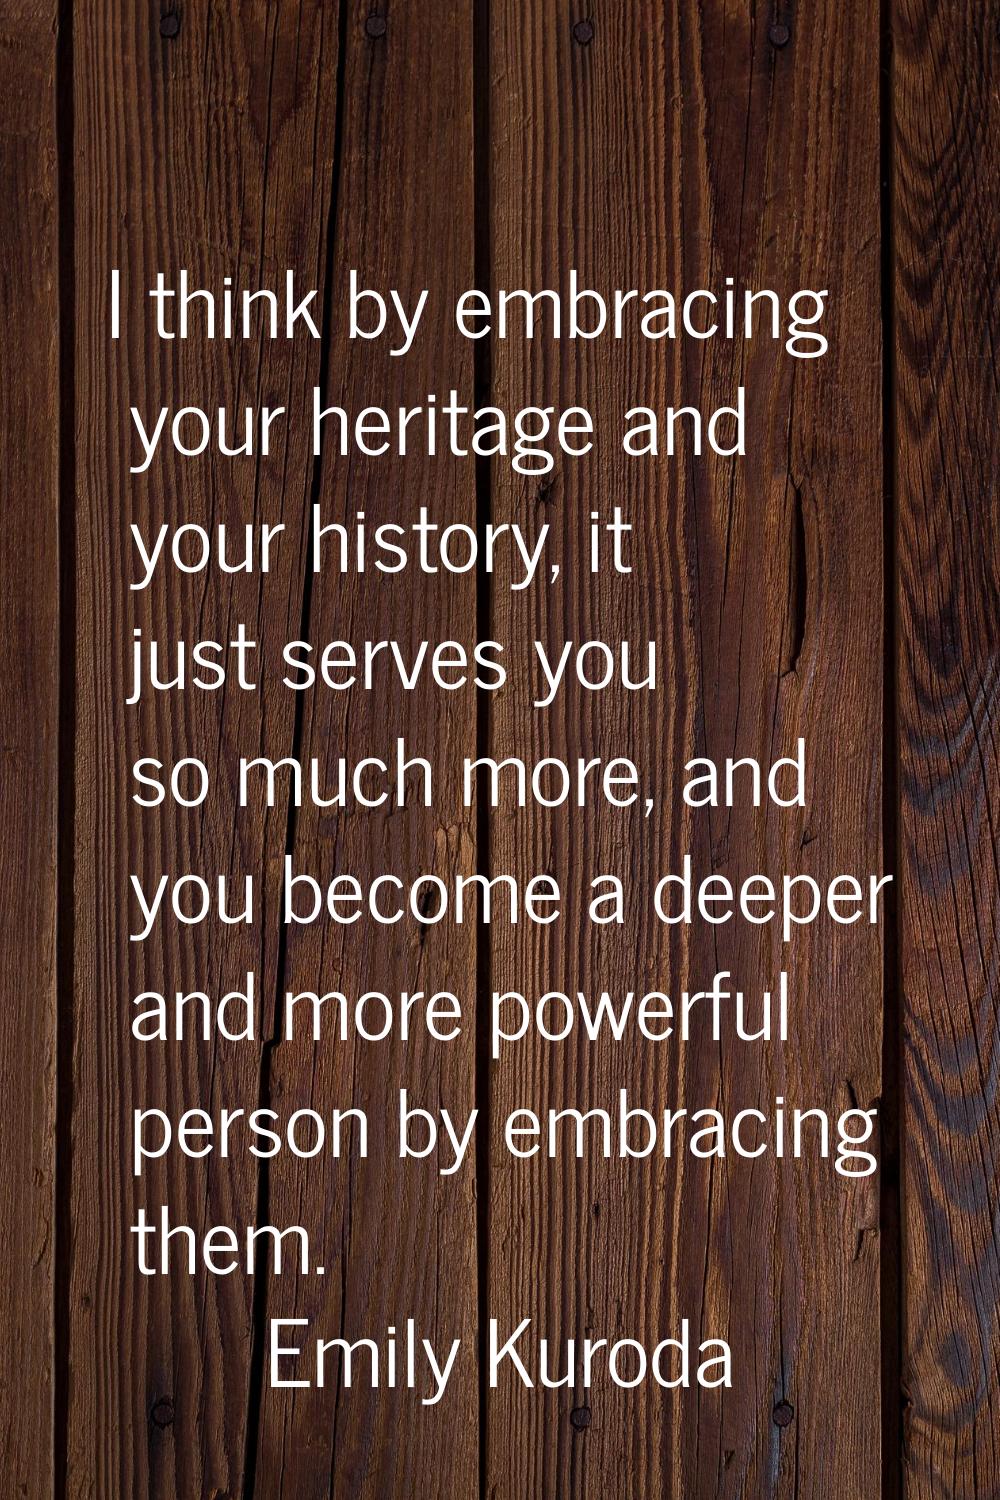 I think by embracing your heritage and your history, it just serves you so much more, and you becom